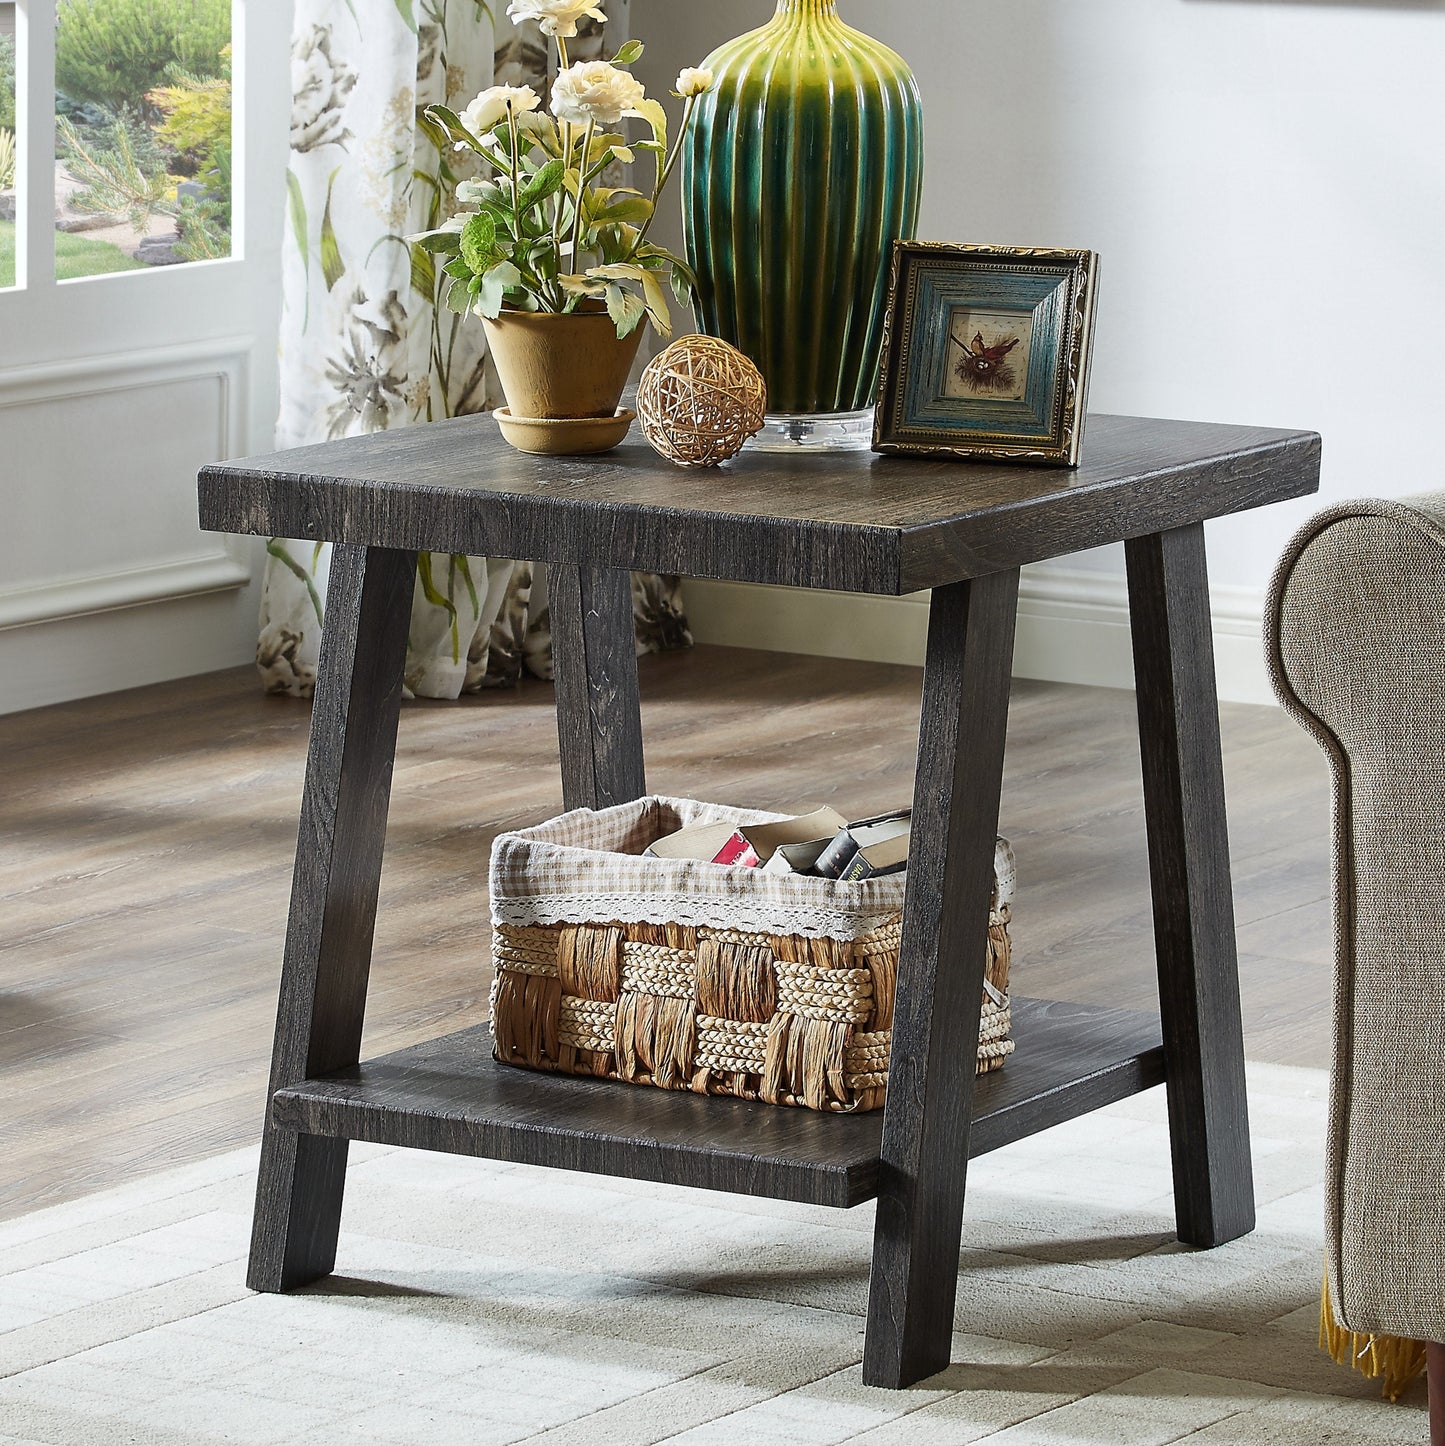 Athens Contemporary Replicated Wood Shelf End Table in Charcoal Finish